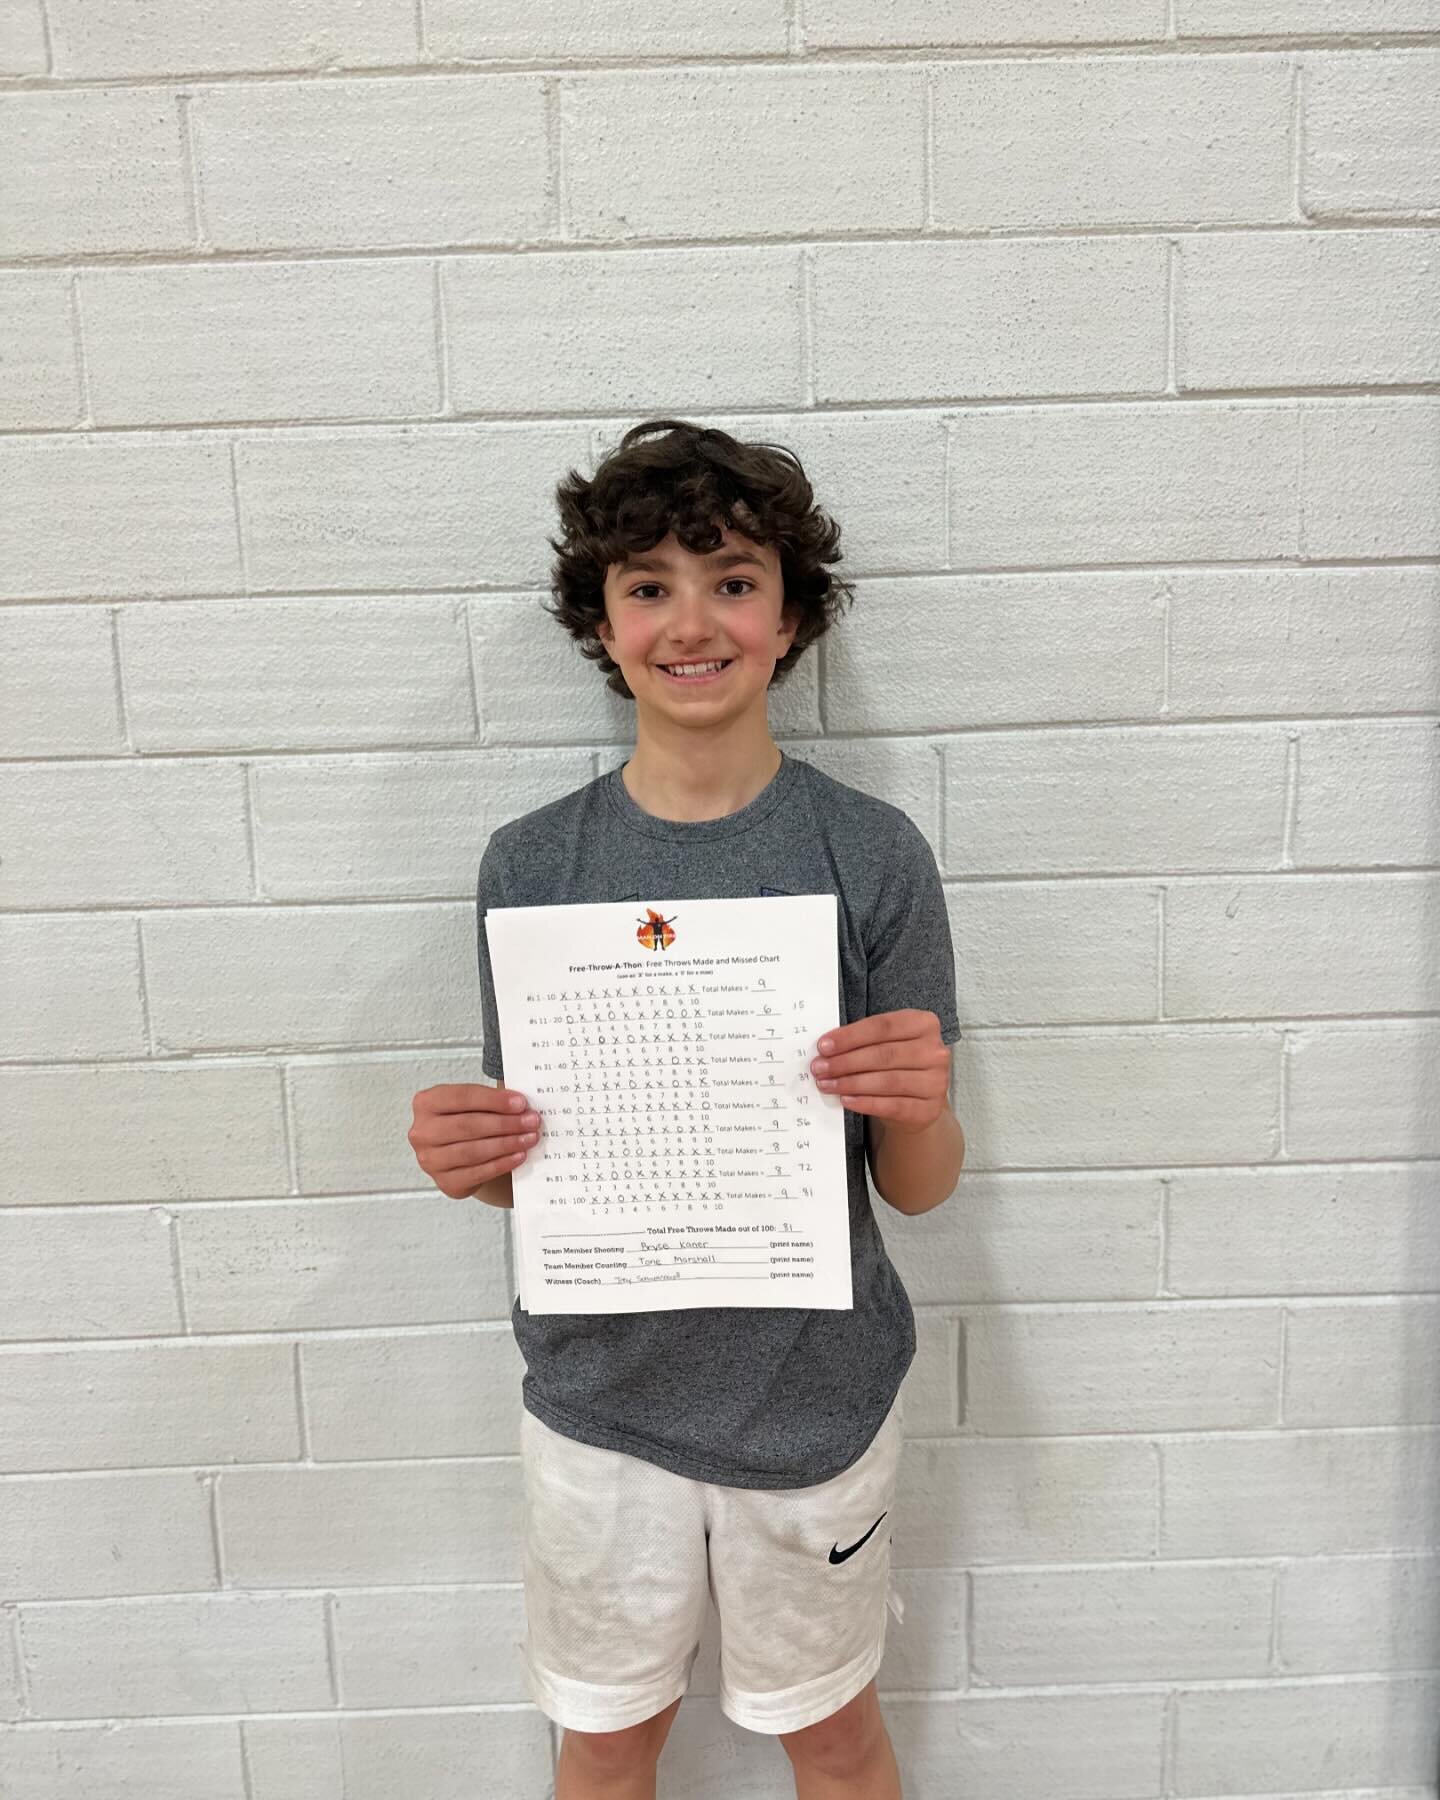 We are grateful for all of the participants who shot 100 free throws for this years fundraiser&hellip; but there can only be one FREE THROW KING&hellip;. with a total of 81/100, this years highest score belongs to Bryce Kaner!